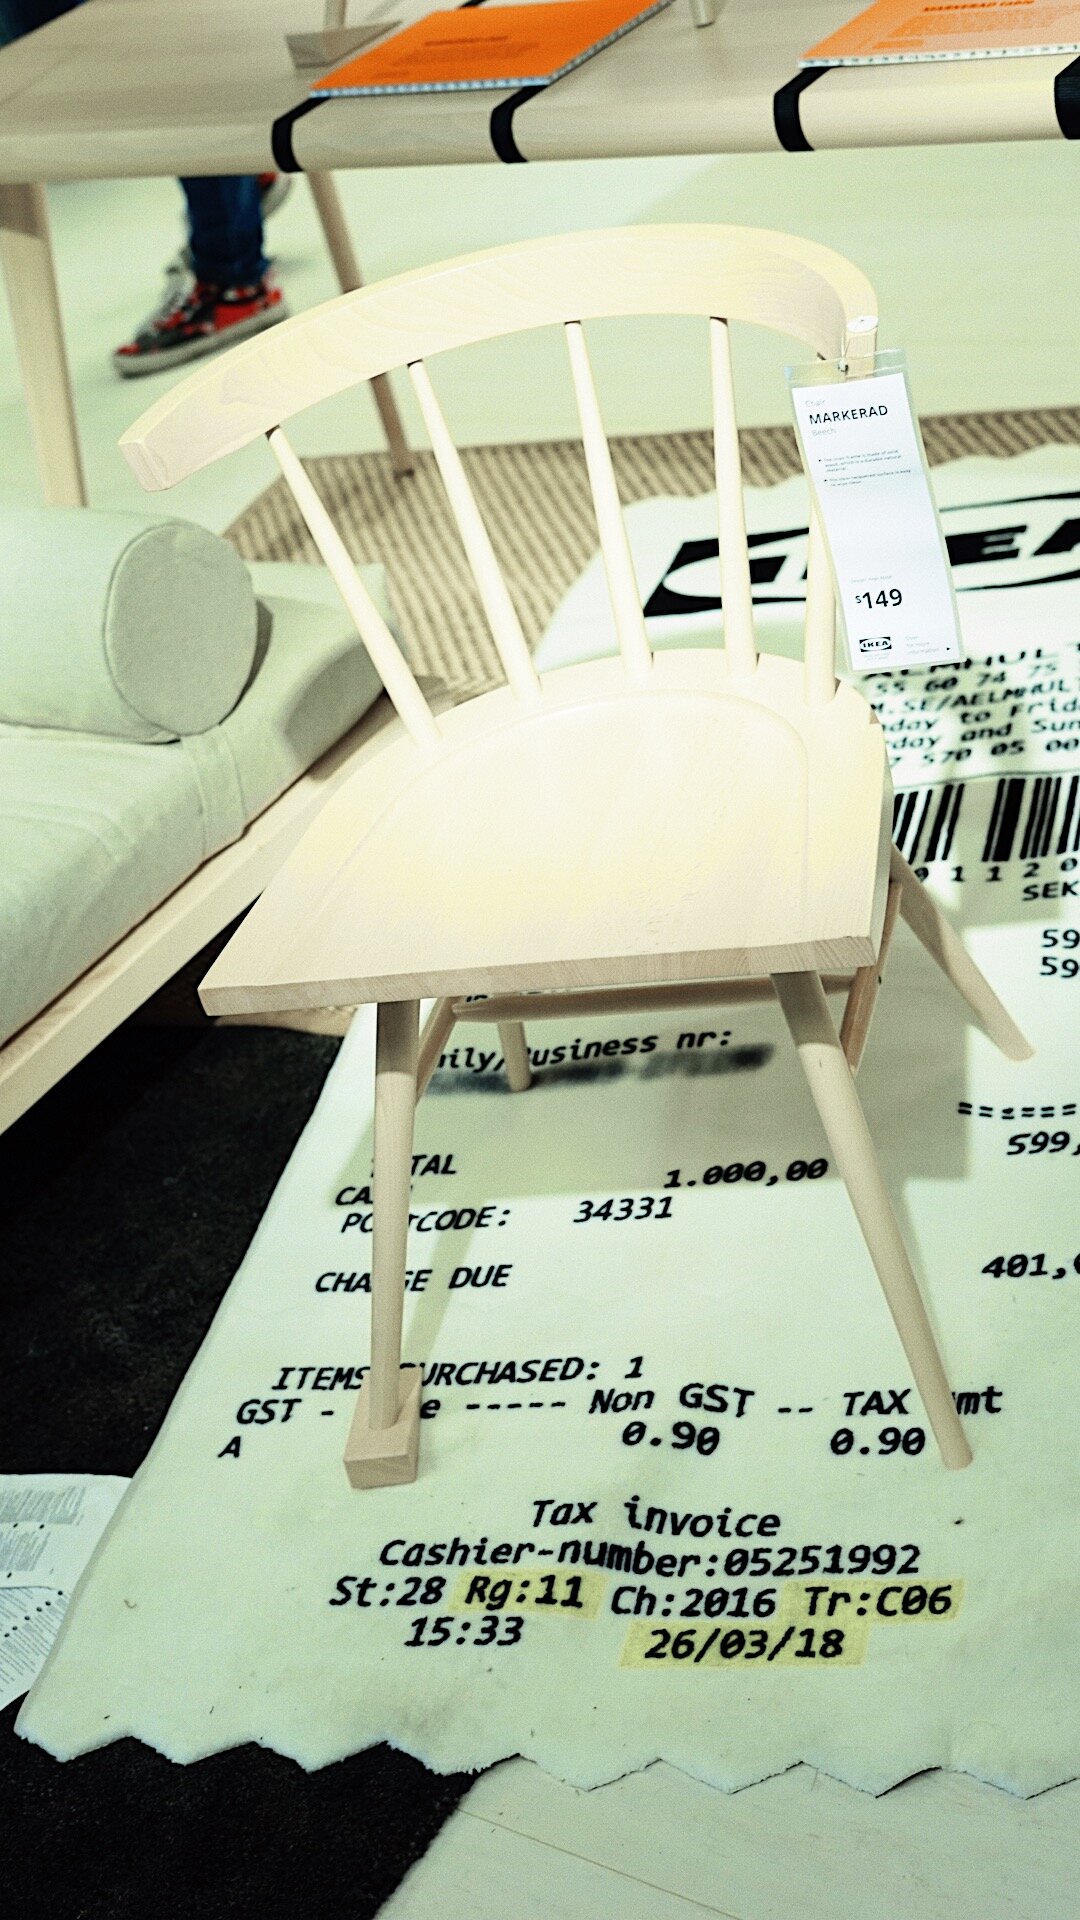 IKEA x OFF WHITE: Release Date & Prices